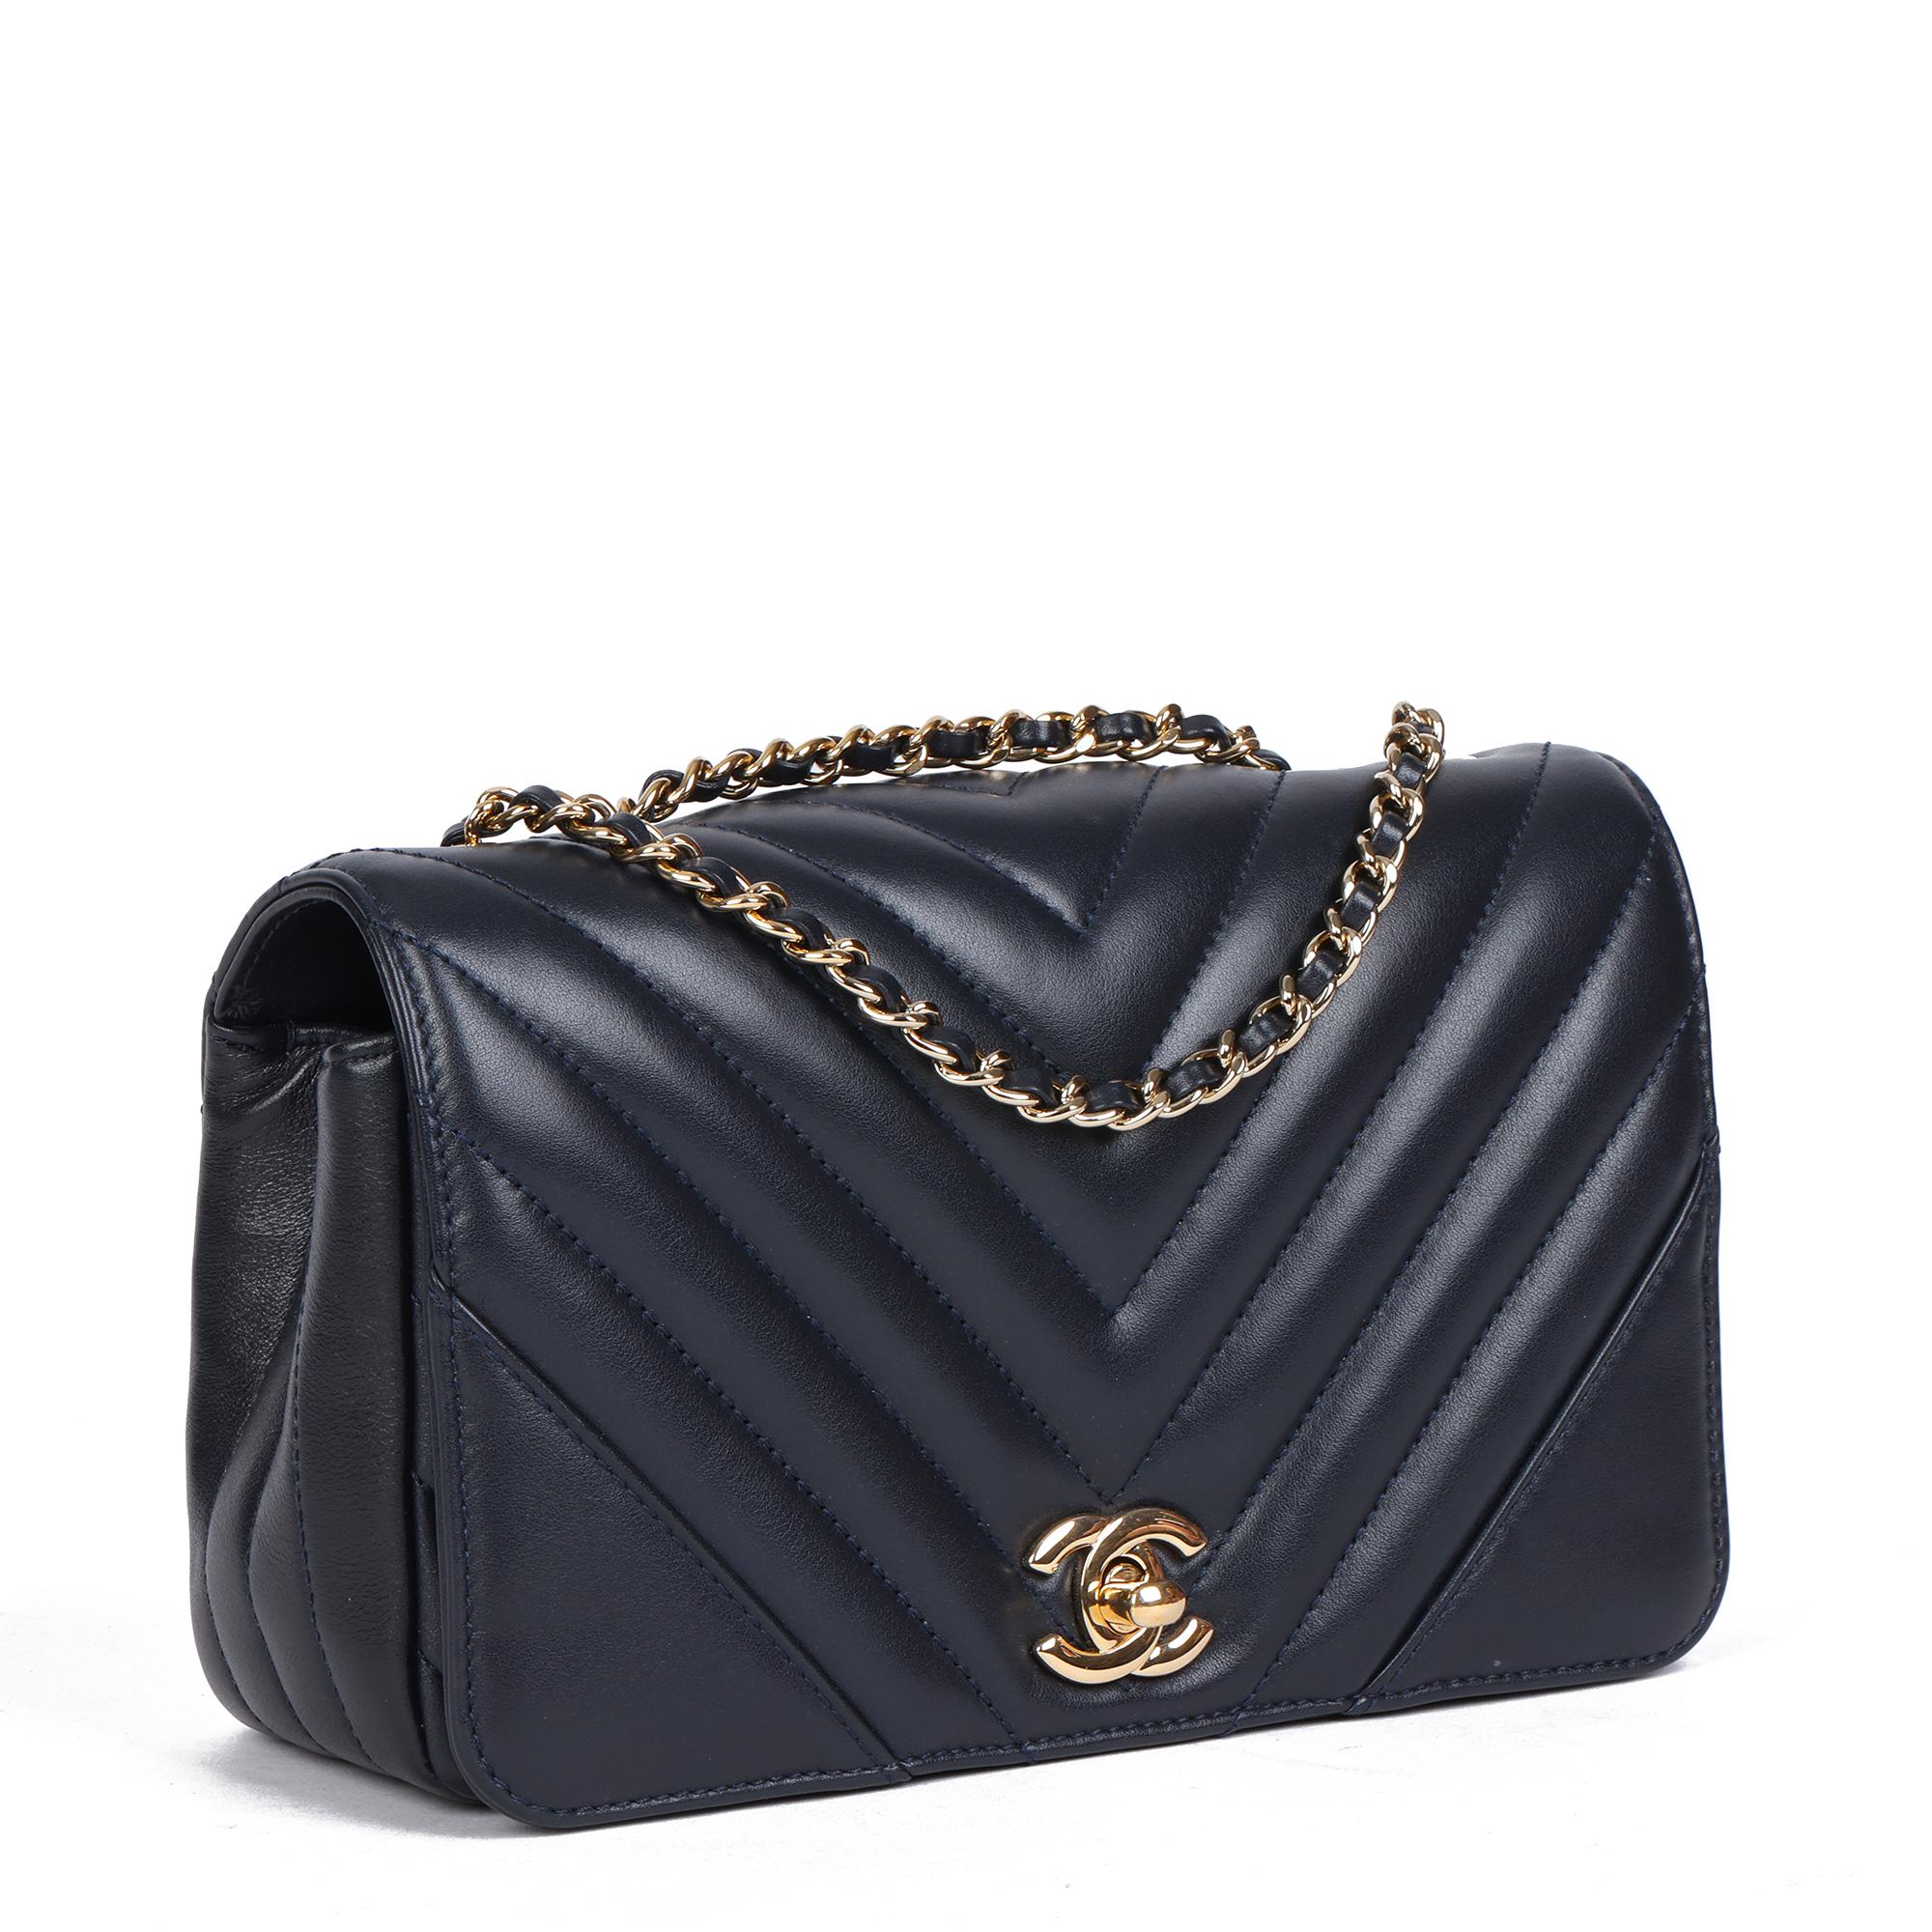 CHANEL
Navy Chevron Quilted Lambskin Mini Statement Classic Single Flap Bag

Xupes Reference: CB572
Serial Number: 28094393
Age (Circa): 2019
Accompanied By: Chanel Dust Bag, Box, Authenticity Card
Authenticity Details: Authenticity Card, Serial